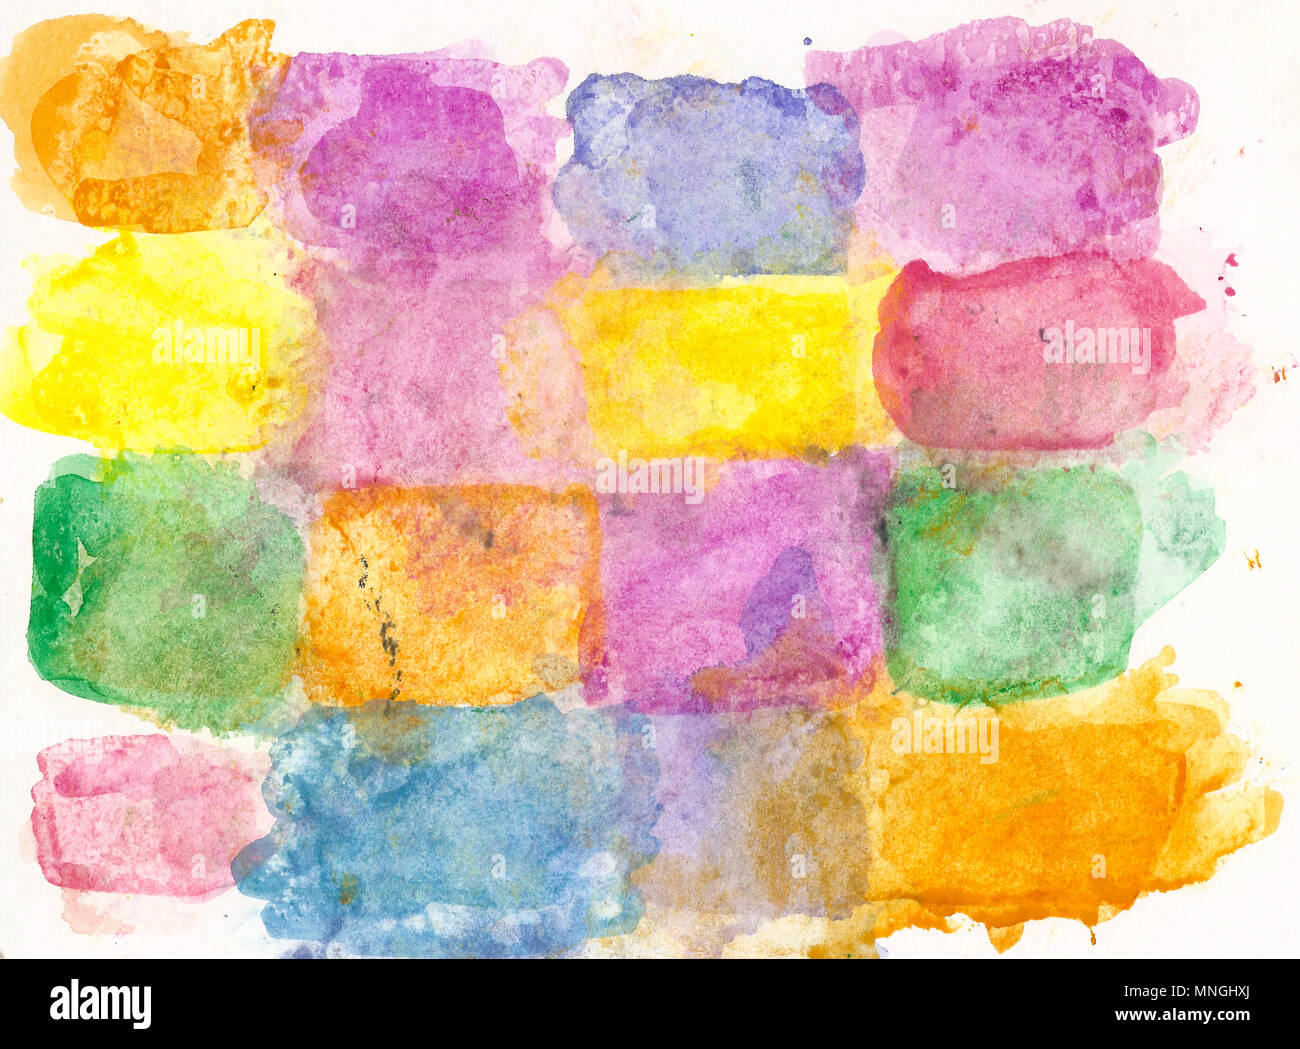 hand drawn watercolor background Stock Photo